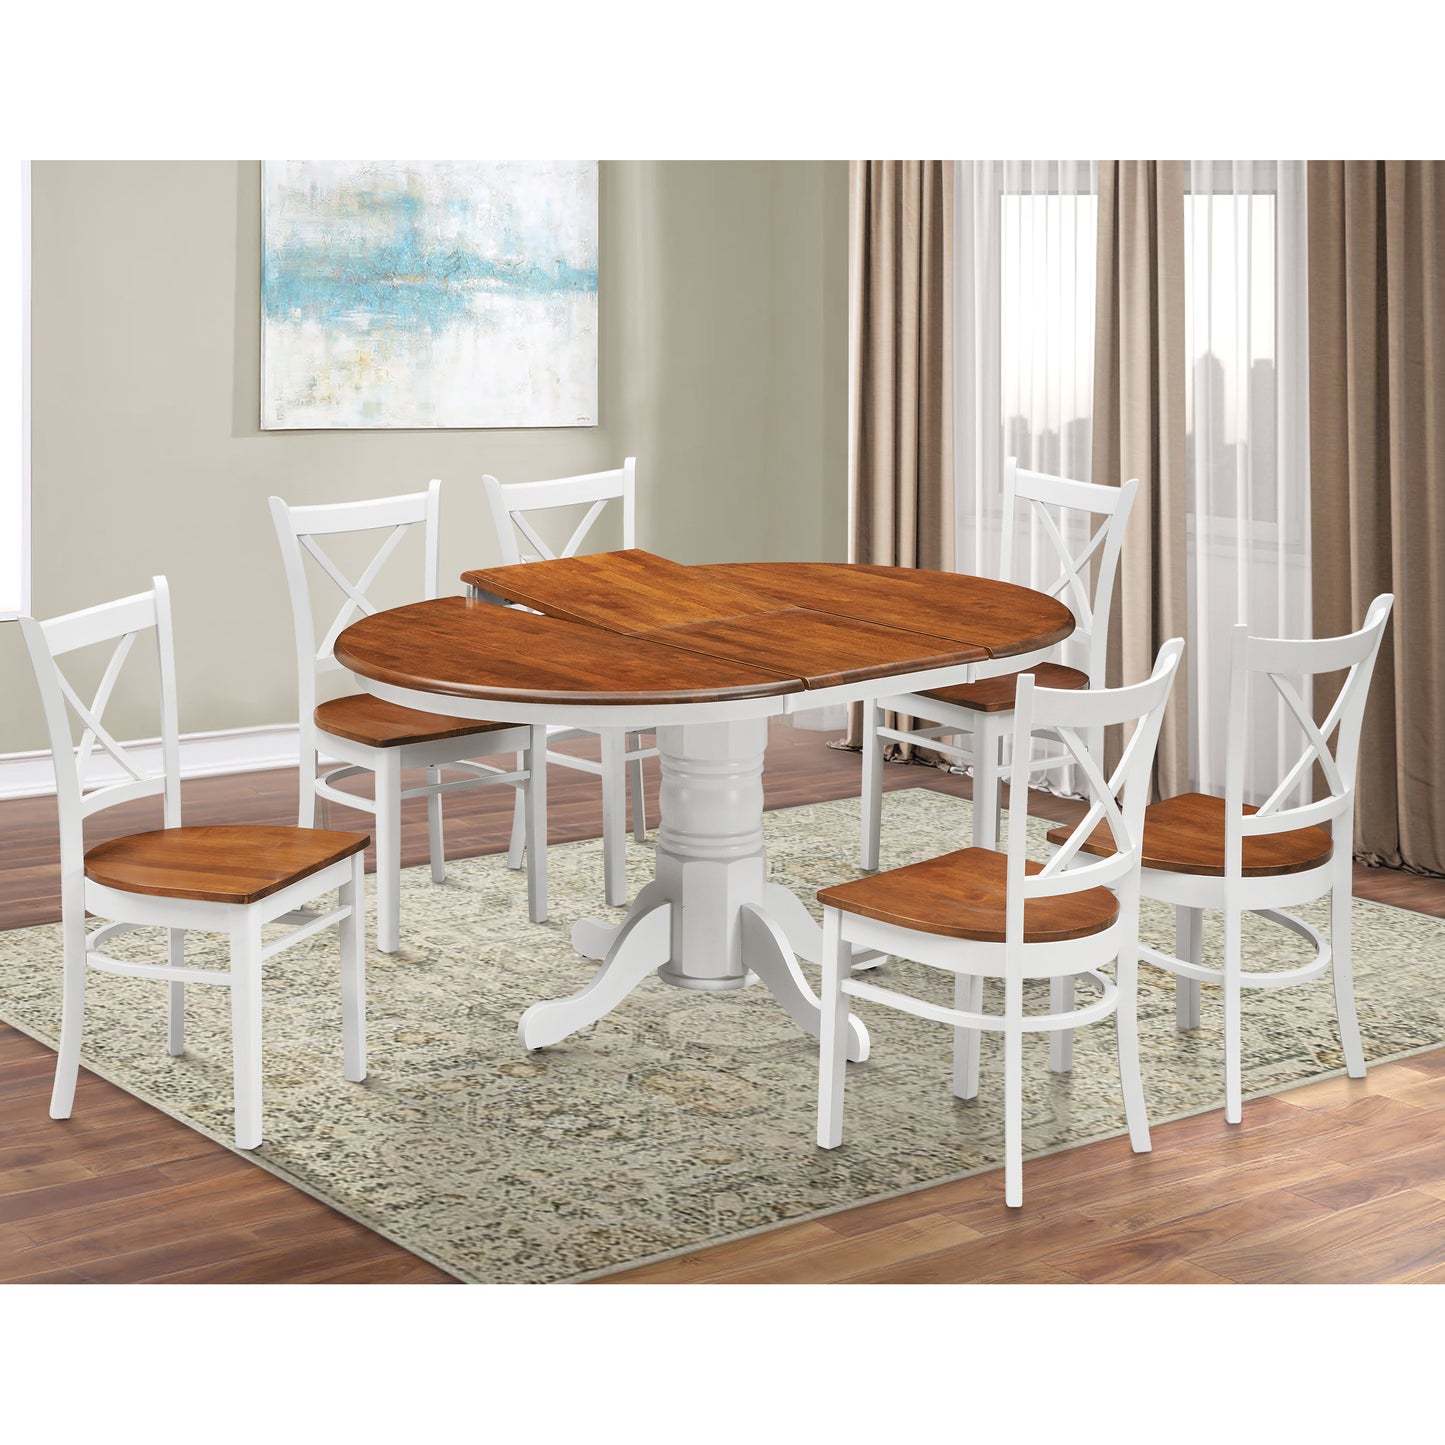 Lupin Dining Chair Set of 8 Crossback Solid Rubber Wood Furniture - White Oak